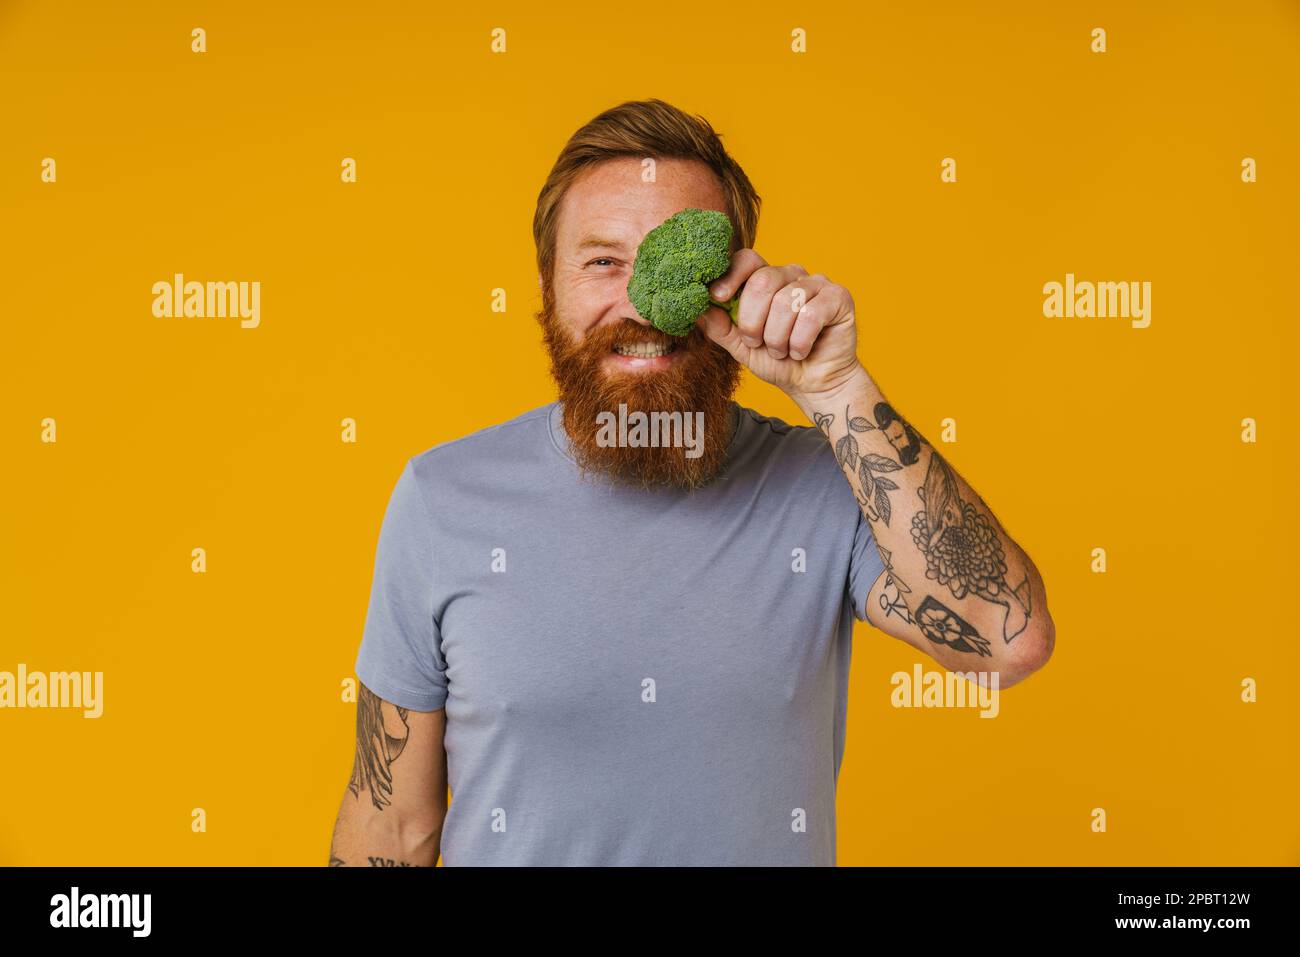 Bearded happy man holding broccoli while standing isolated over yellow background Stock Photo